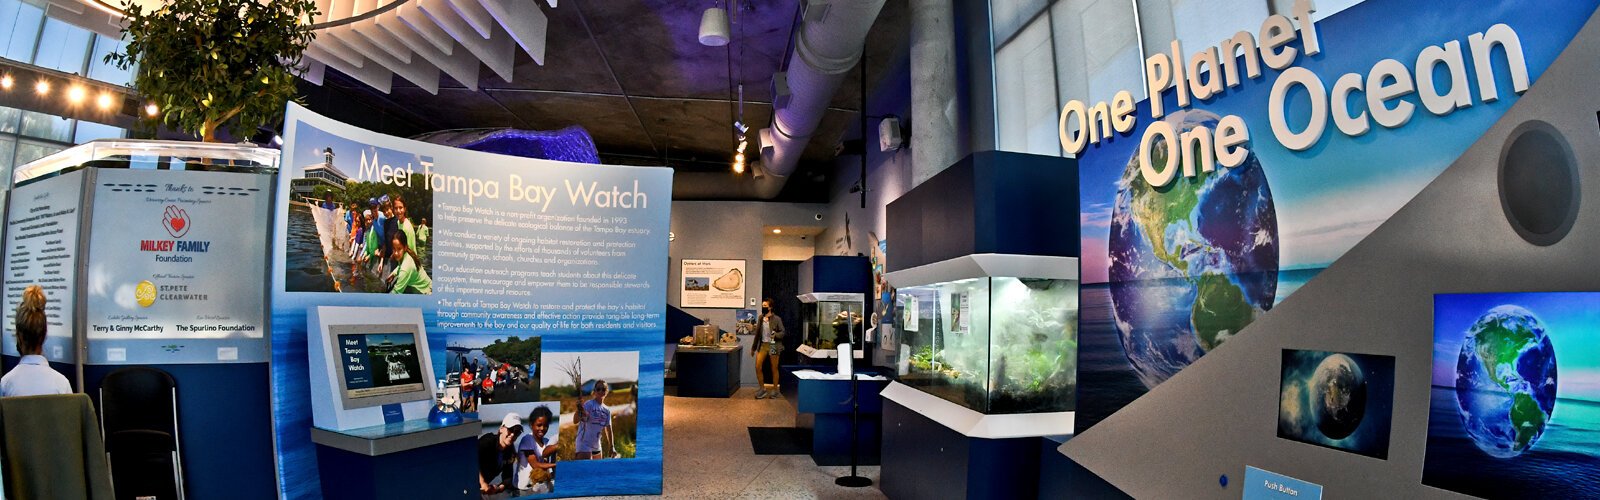 A Discovery Center and wet classroom operated by Tampa Bay Watch are attractions that make the Pier District both fun and educational.